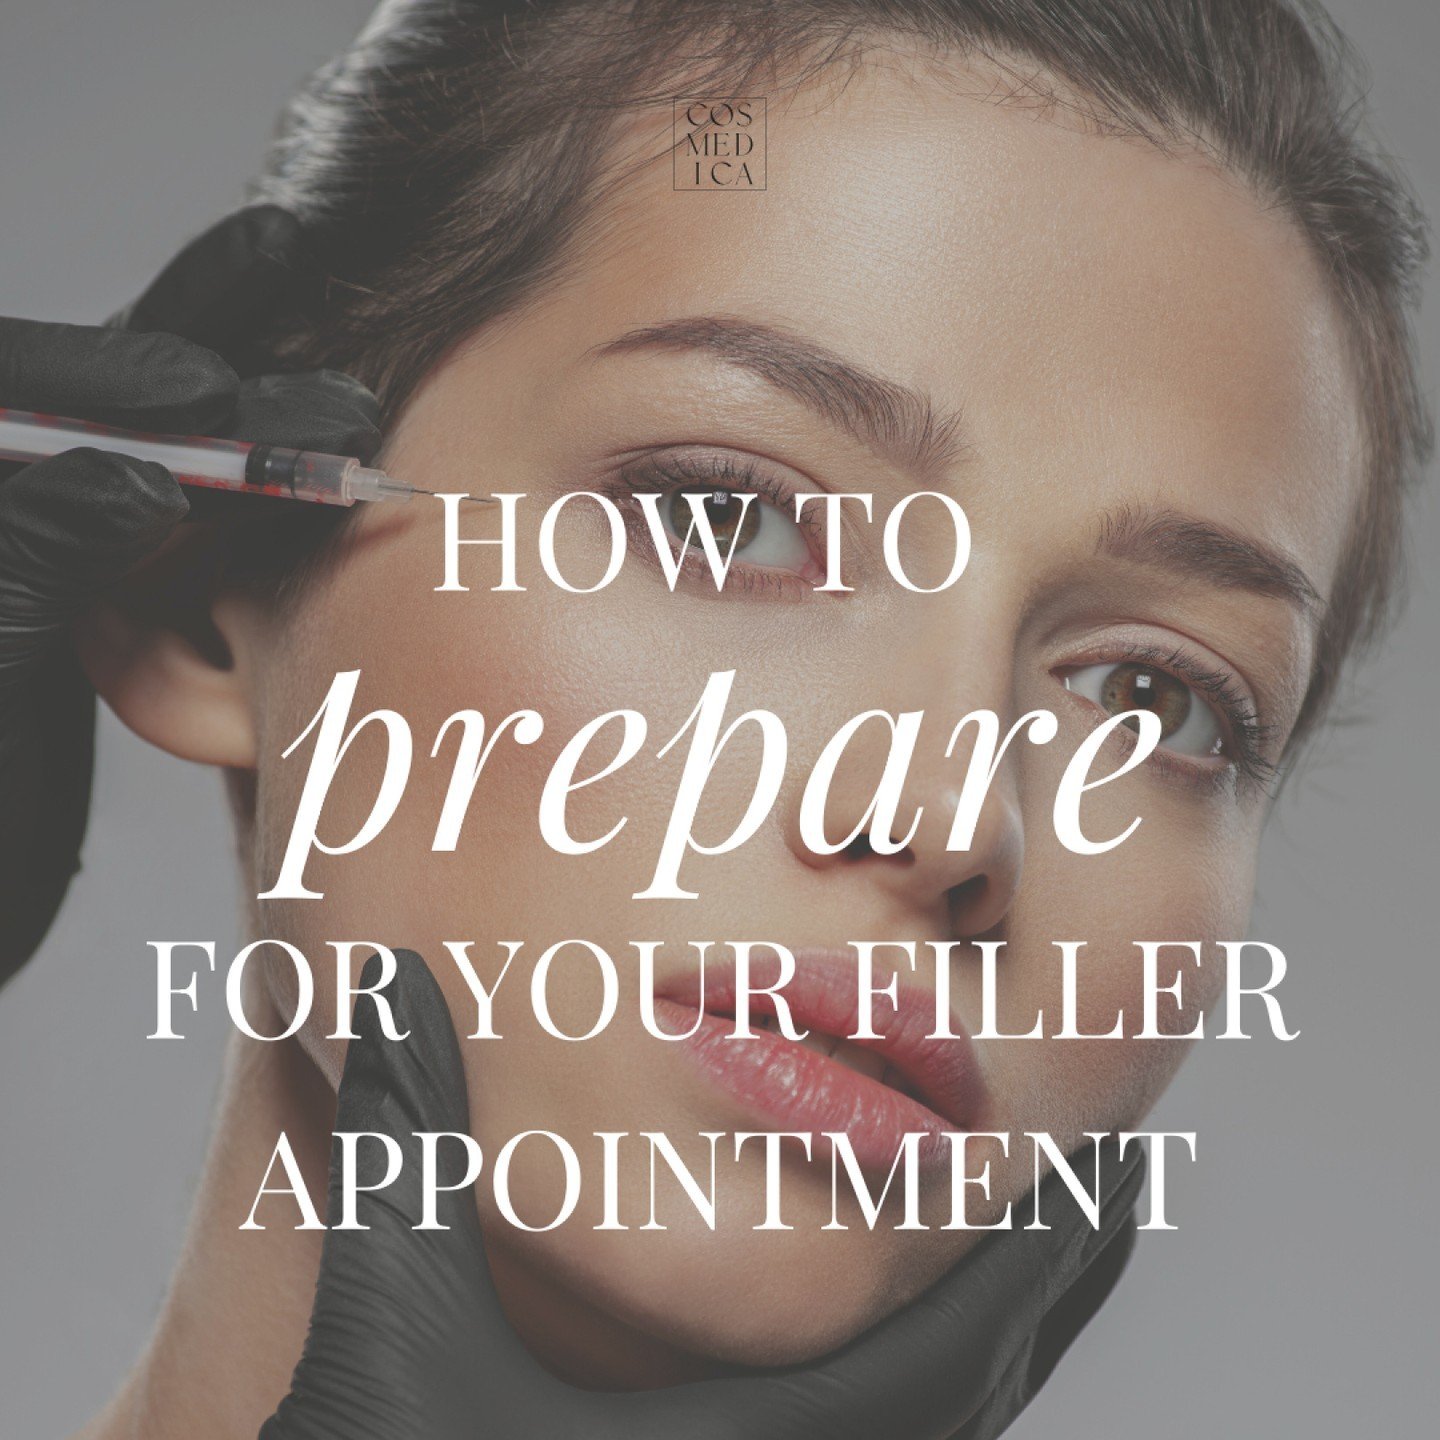 How to prepare for your filler appointment?

Preparing for your filler appointment provides you with the best results and minimal downtime. 

1. Do not take any ibuprofen or asprin 1 week prior to your appointment
2. Avoid fish oils, ginko and green 